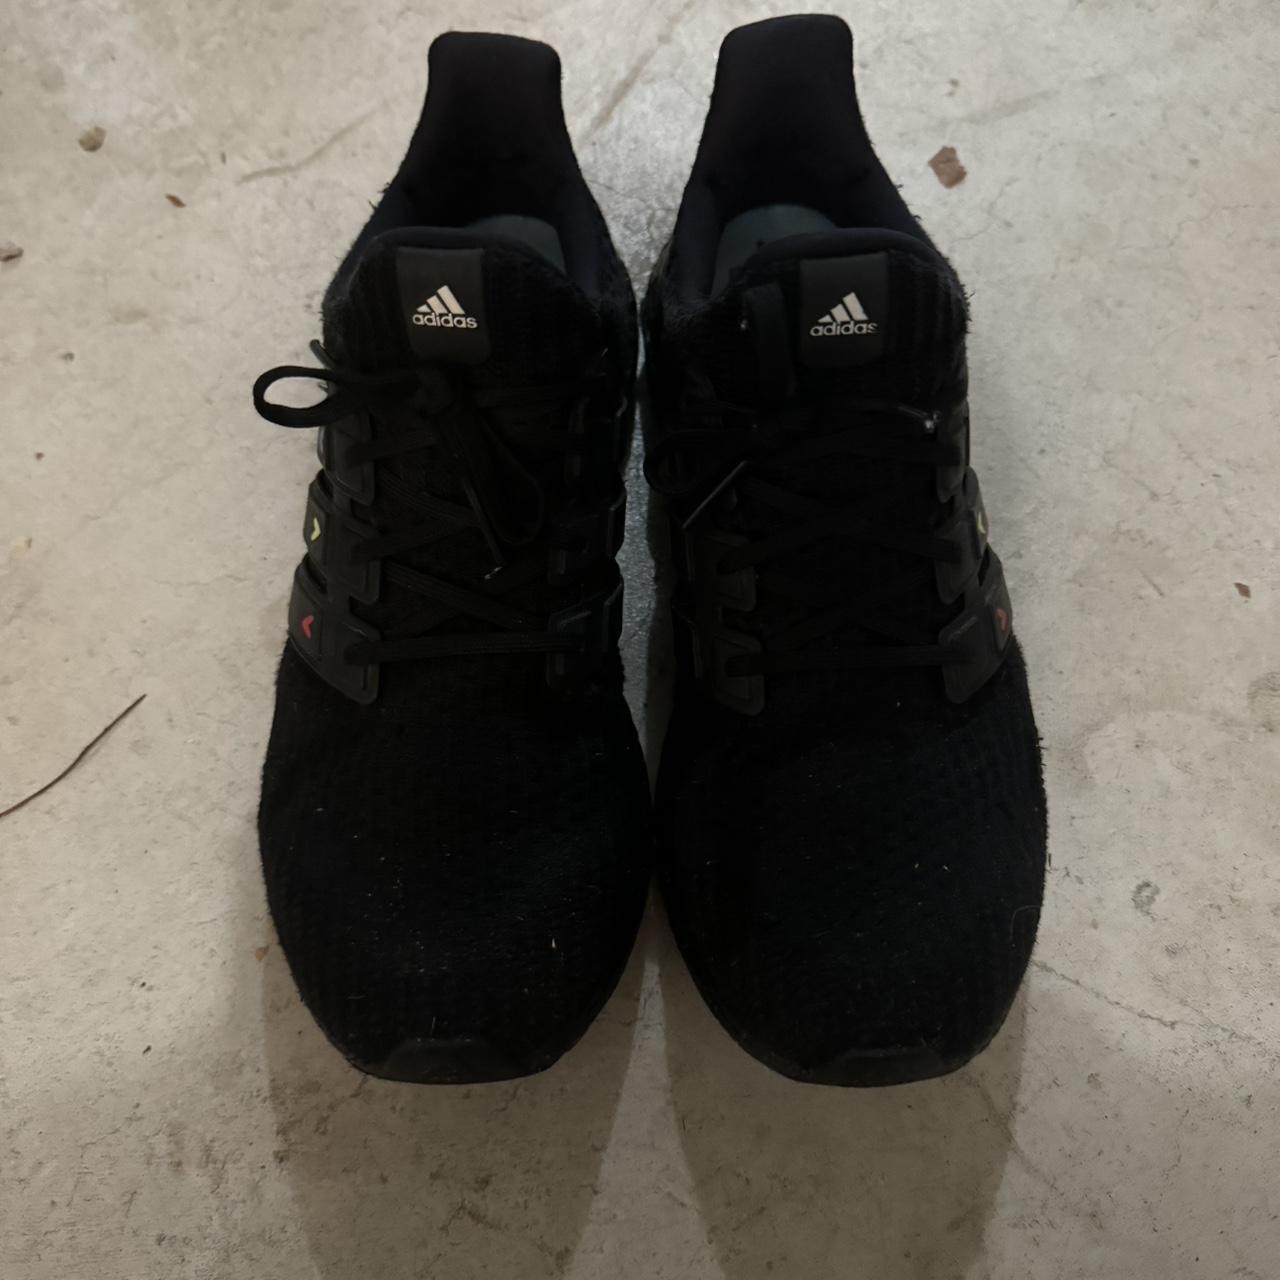 Black adidas ultra boost size 12. Discoloration on... - Depop